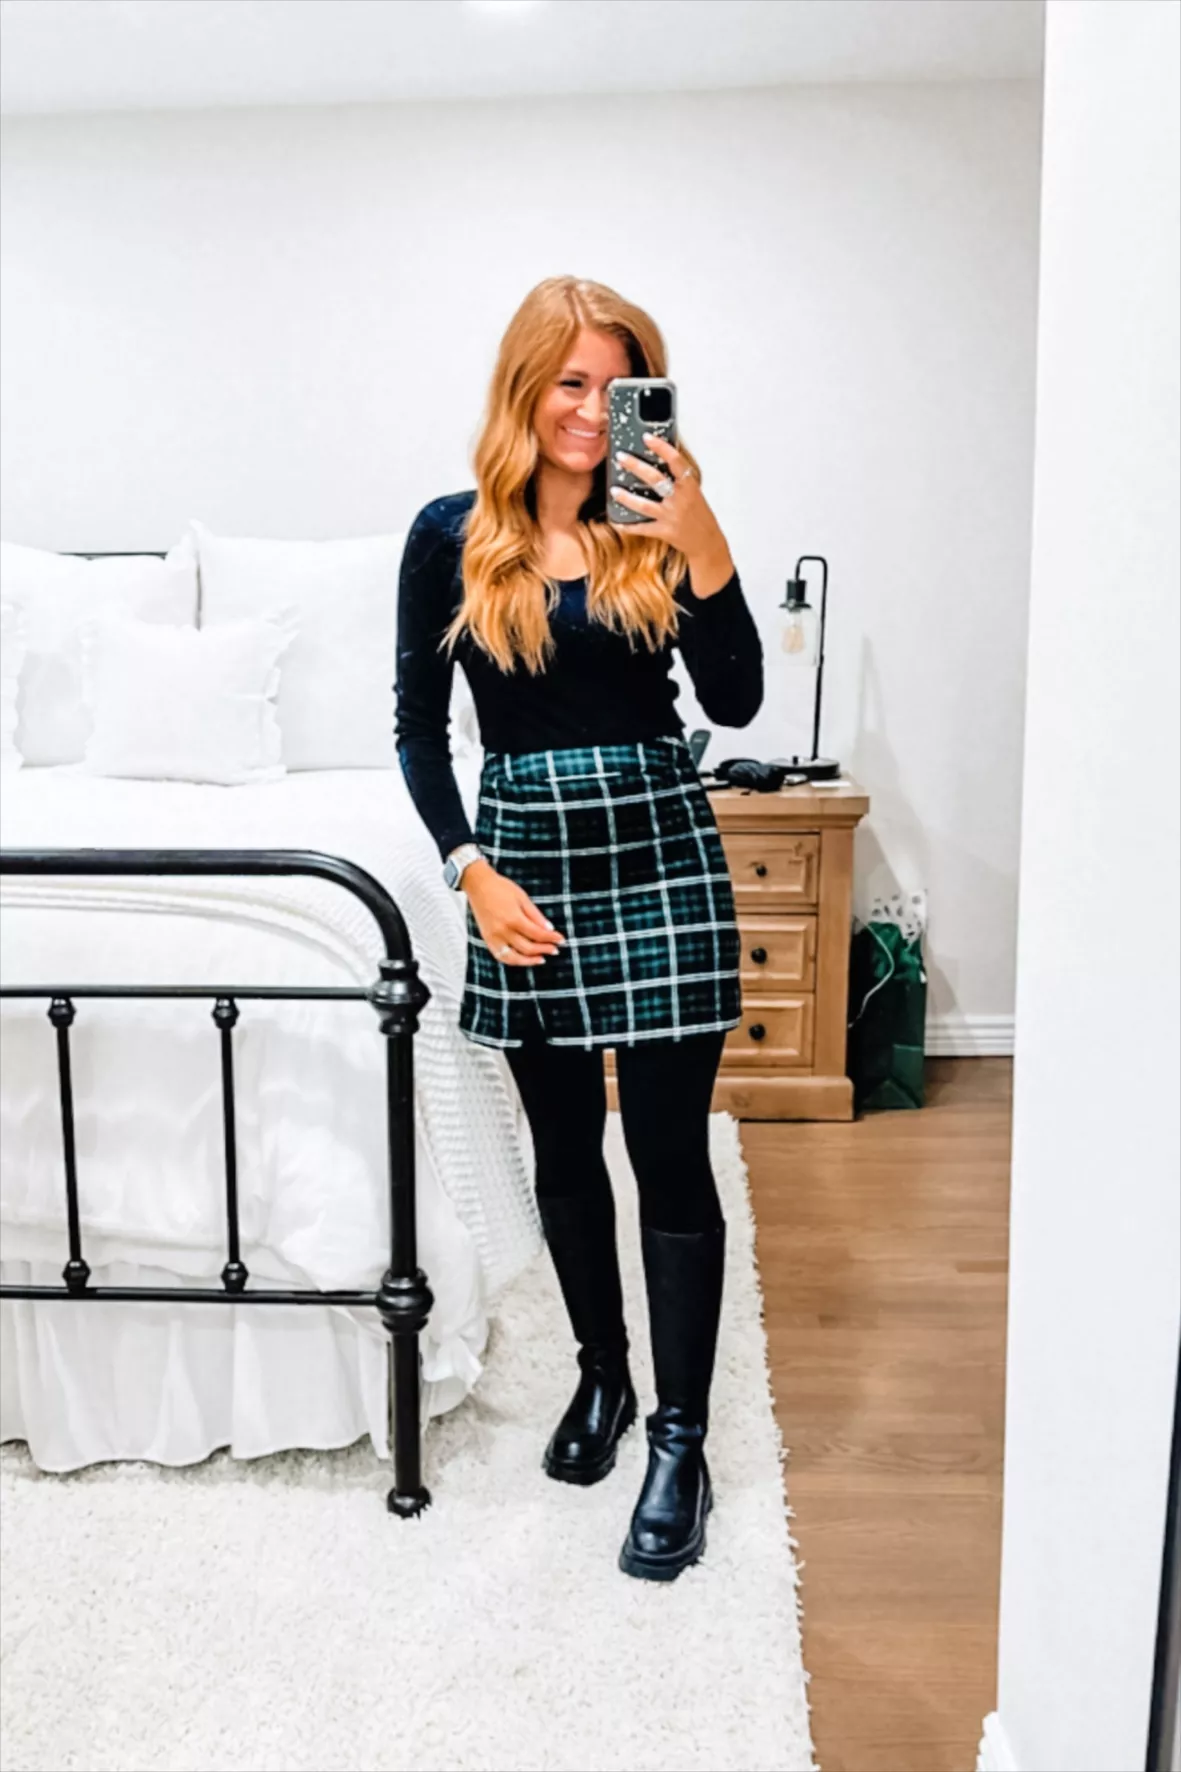 Plaid skirt outfit